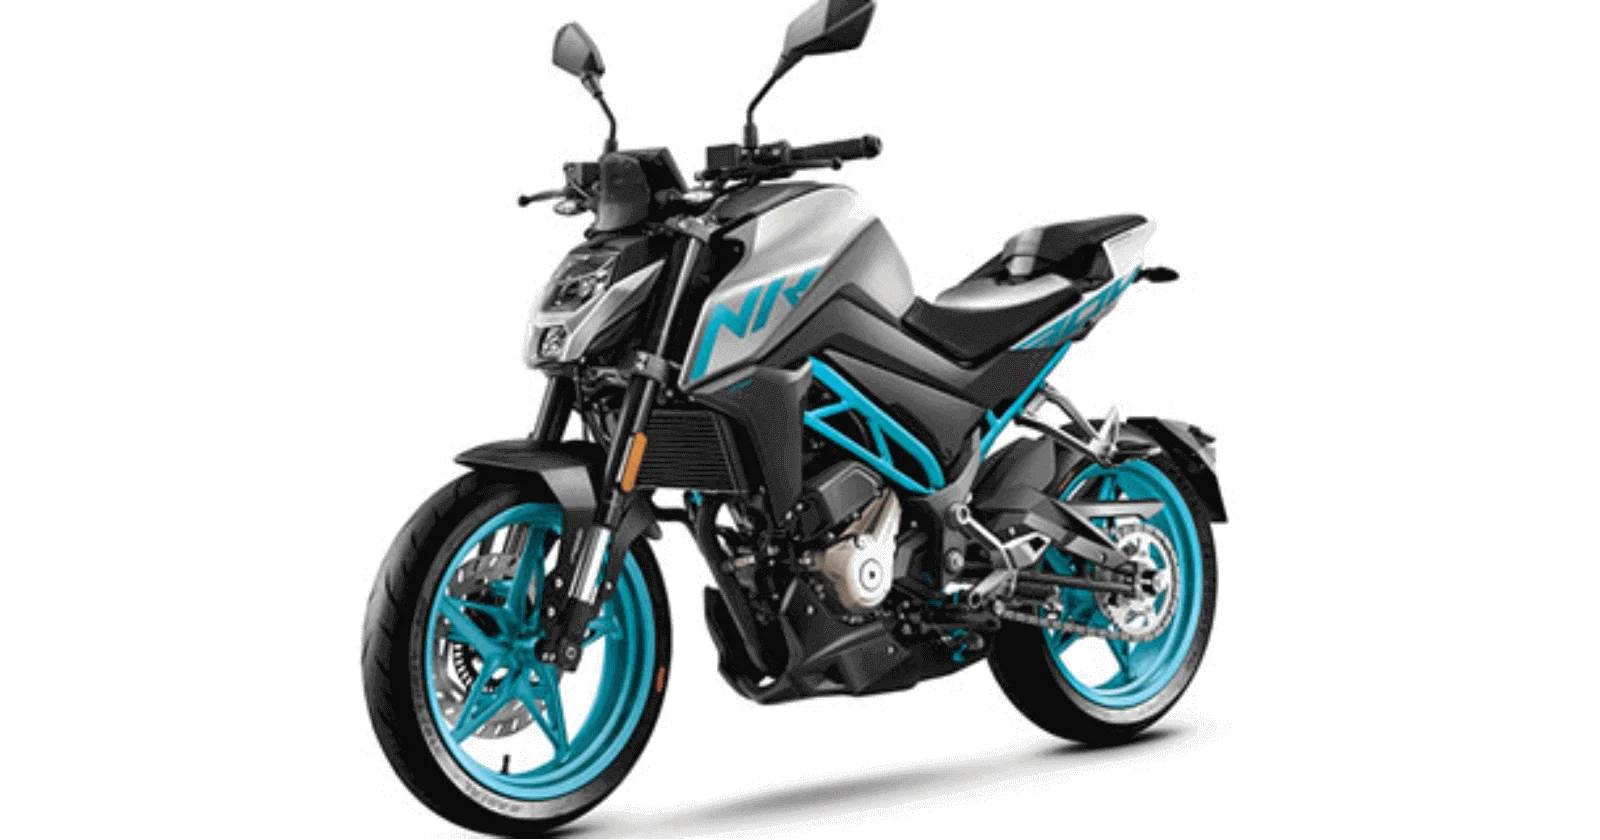 Upcoming CFMoto Bikes in India: Expected Launch Date & Price